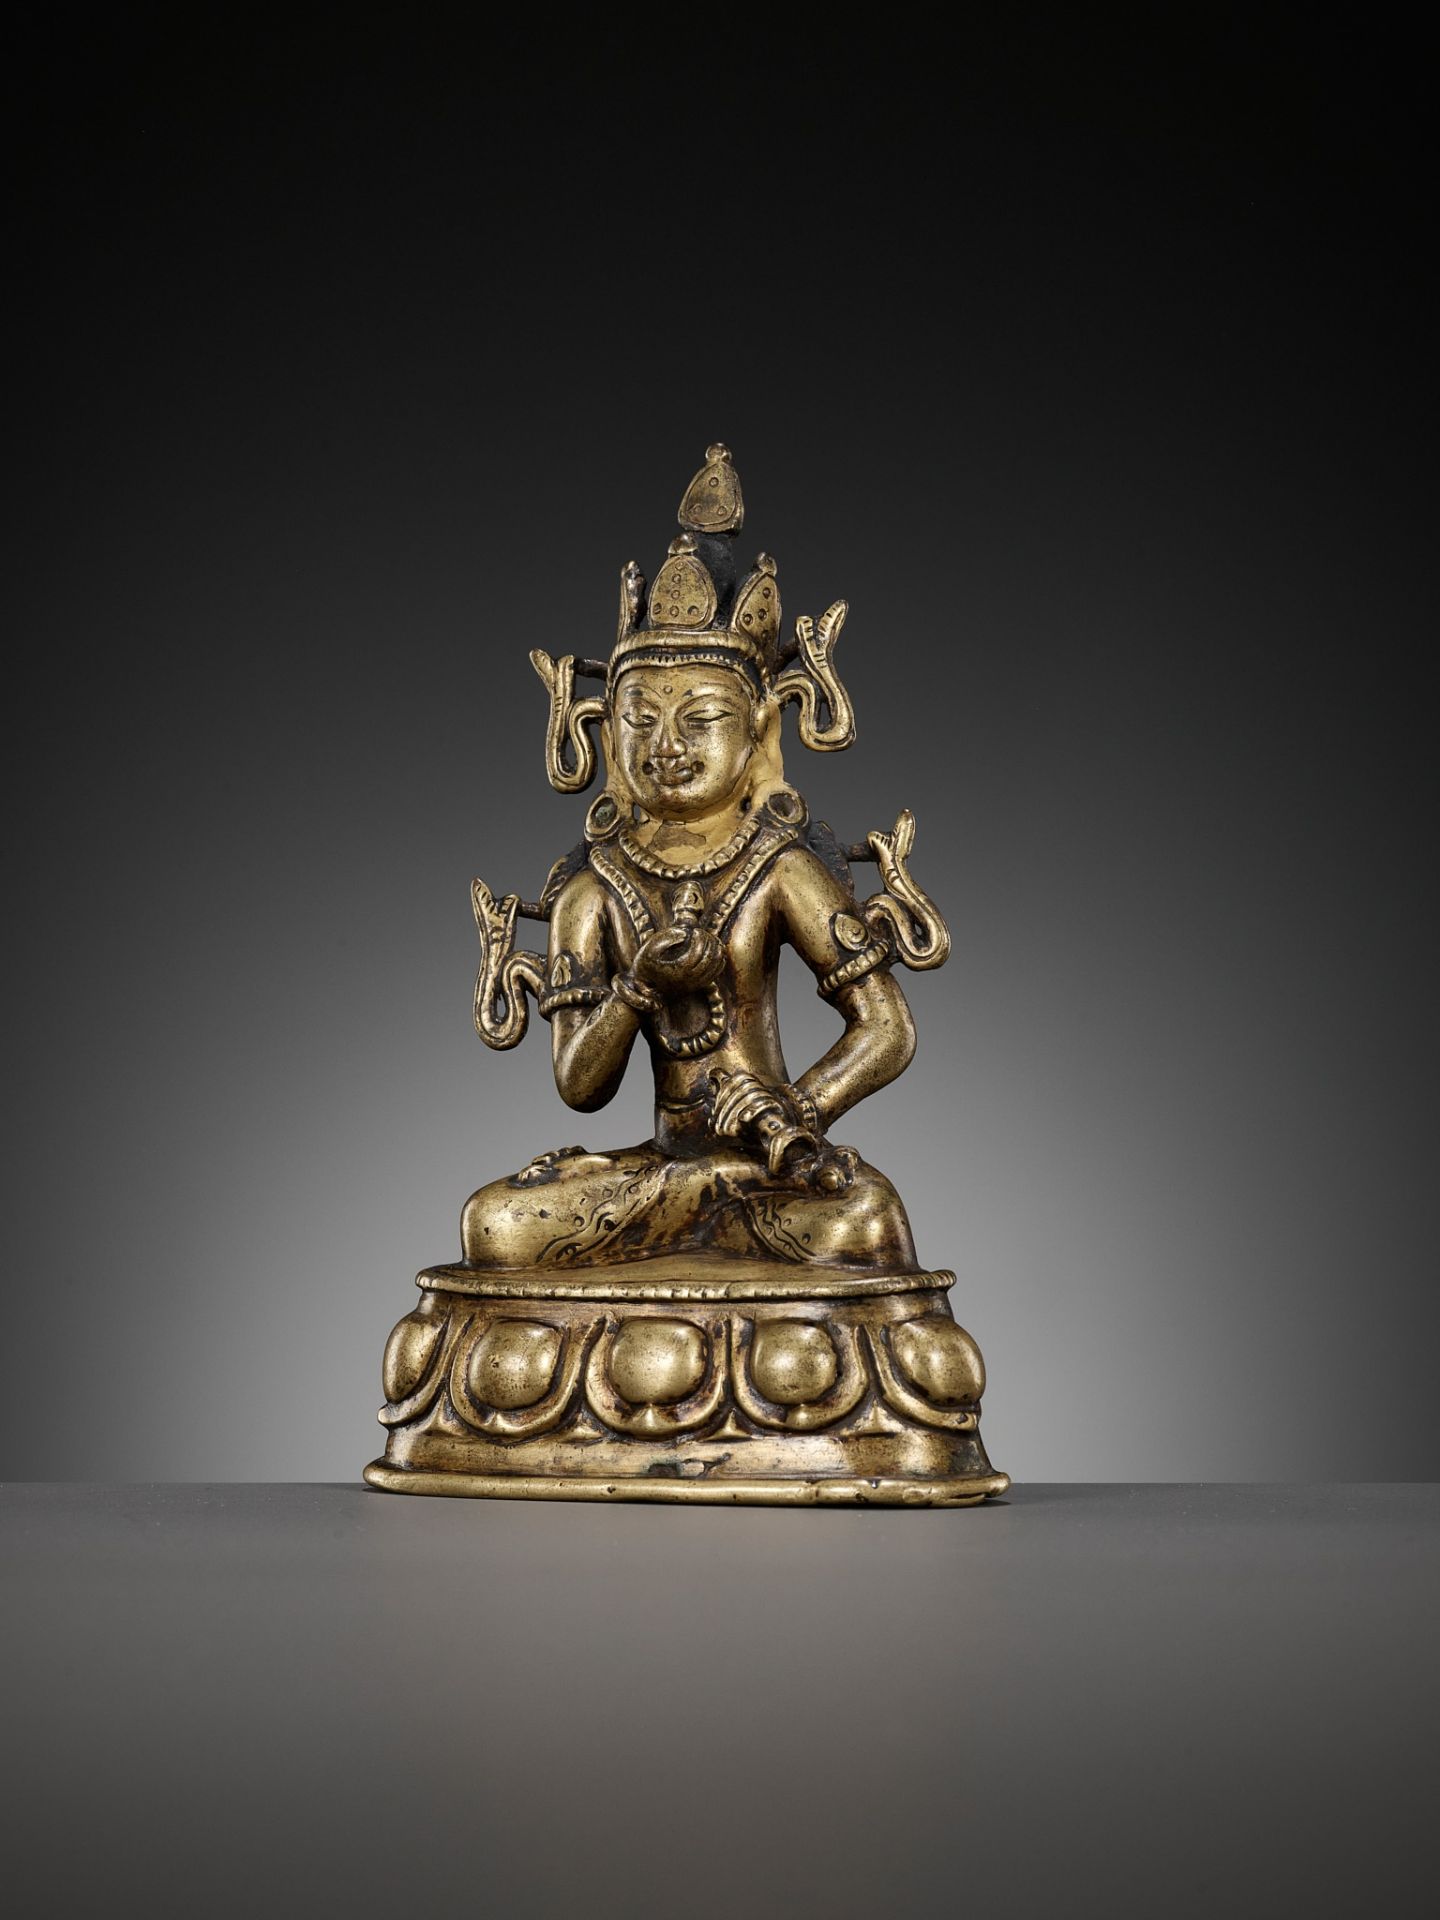 A GILT-BRONZE AND TURQUOISE-INLAID FIGURE OF VAJRASATTVA, KASHMIR STYLE, WEST TIBET, 12TH CENTURY - Image 3 of 10